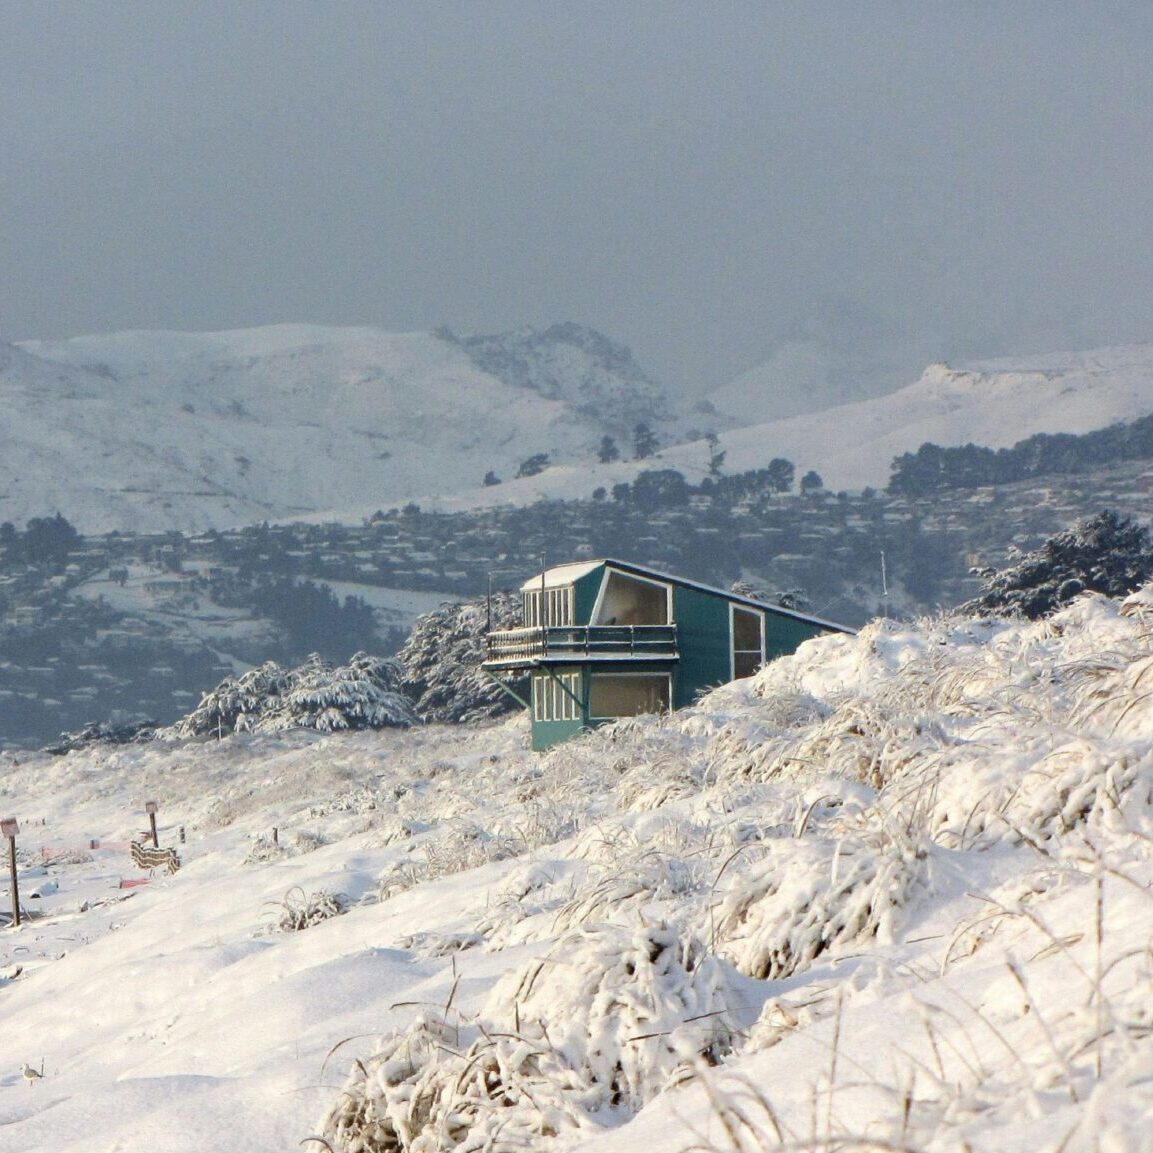 a snowy slope in New Zealand, decorative